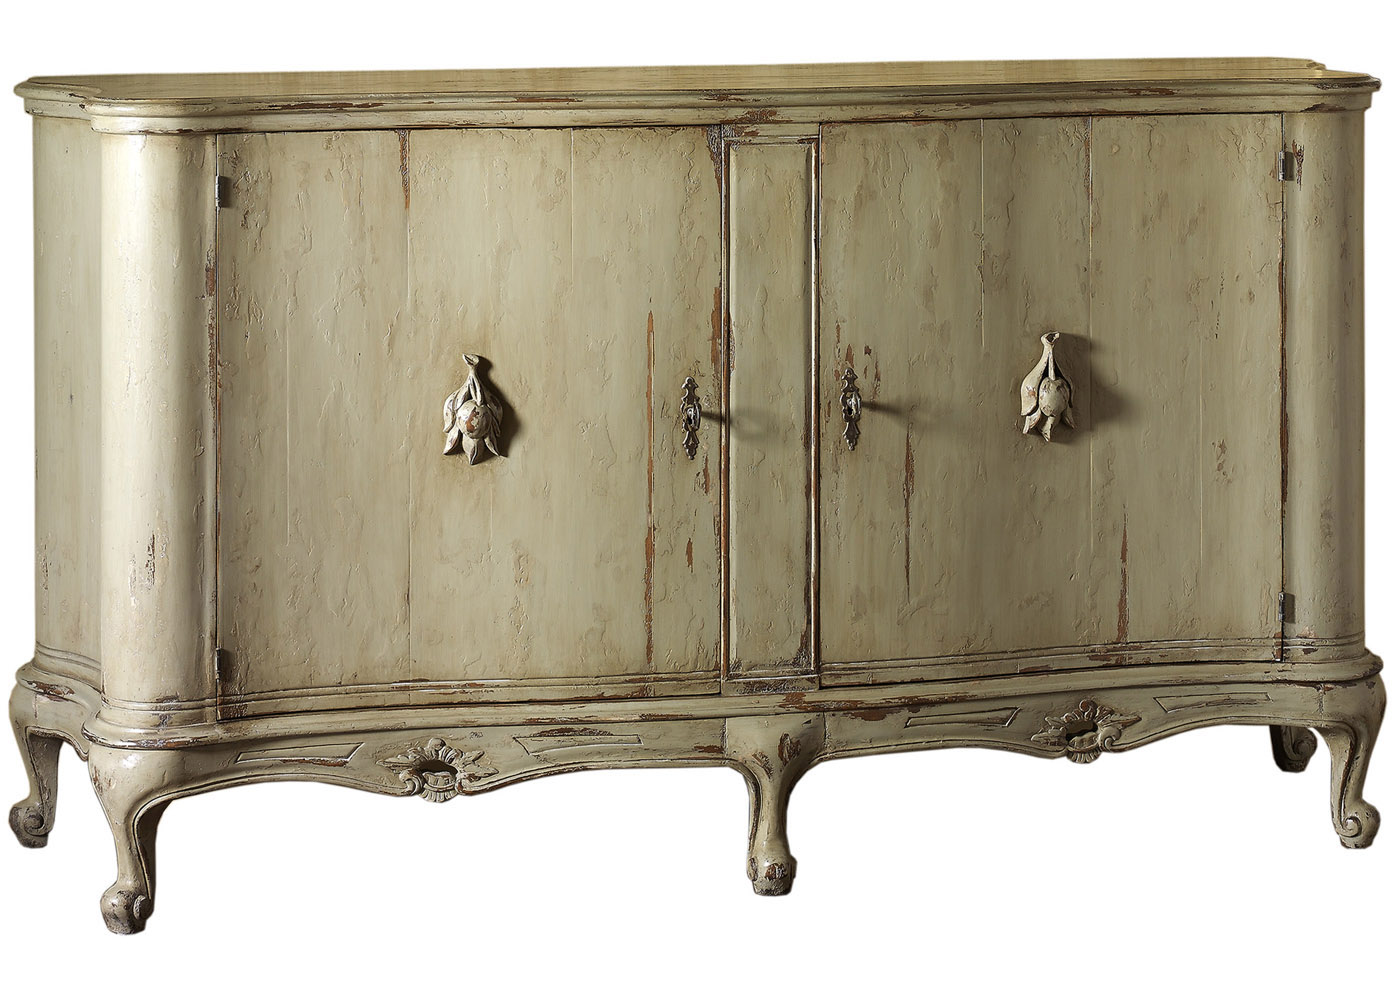 Veronese antique replica painted distressed commode cabinet with hand carved details by Woodland Furniture in Idaho Falls